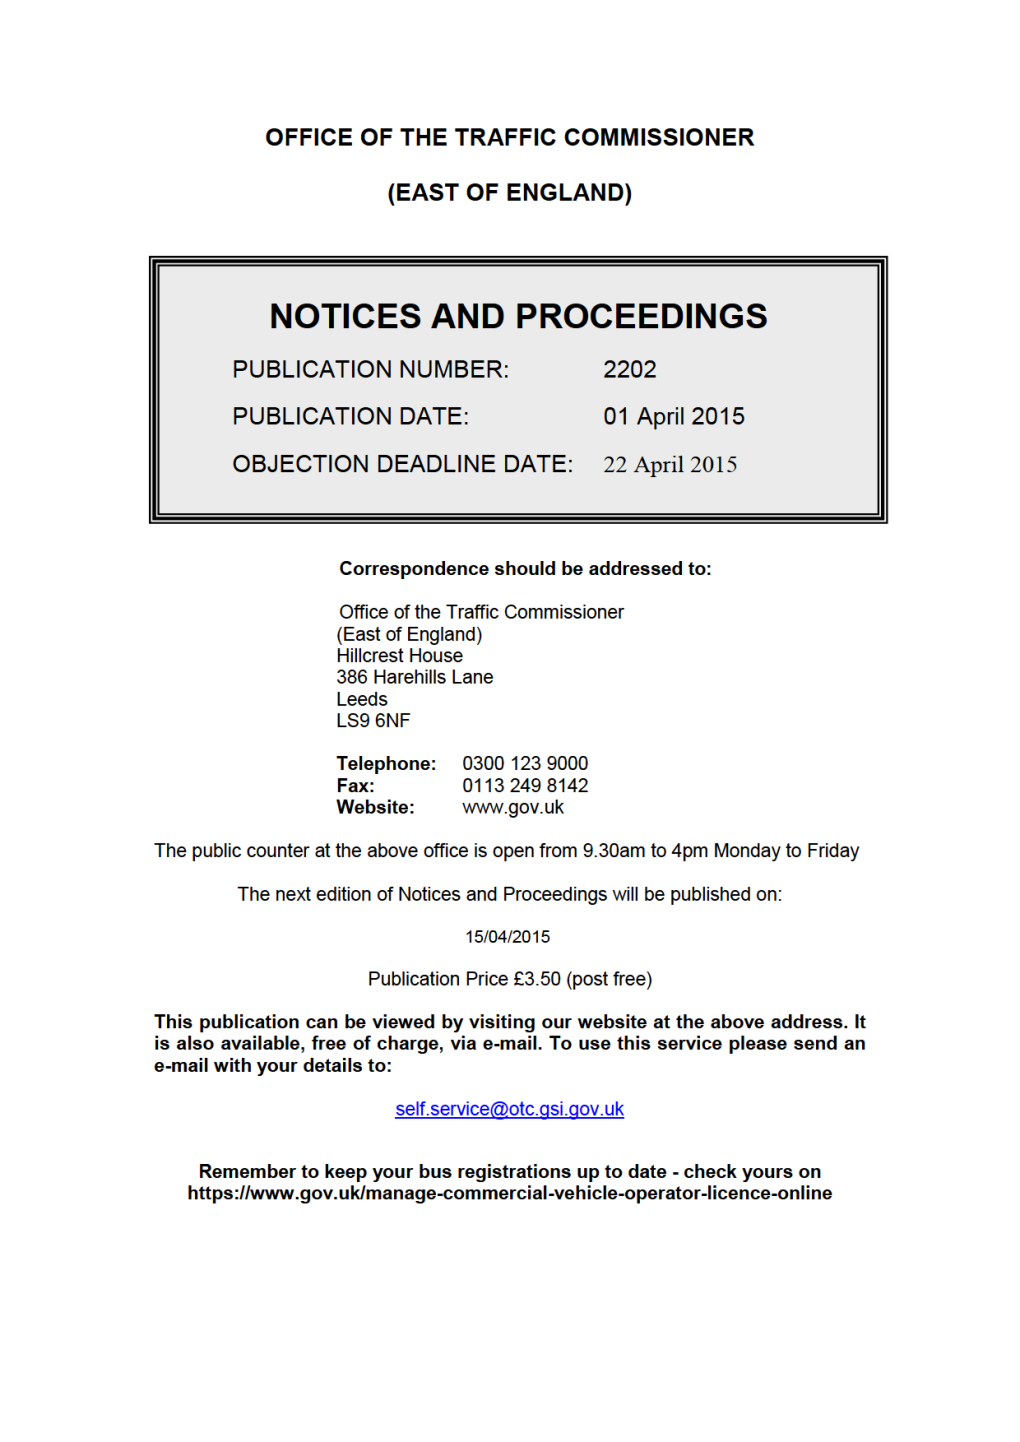 NOTICES and PROCEEDINGS 1 April 2015